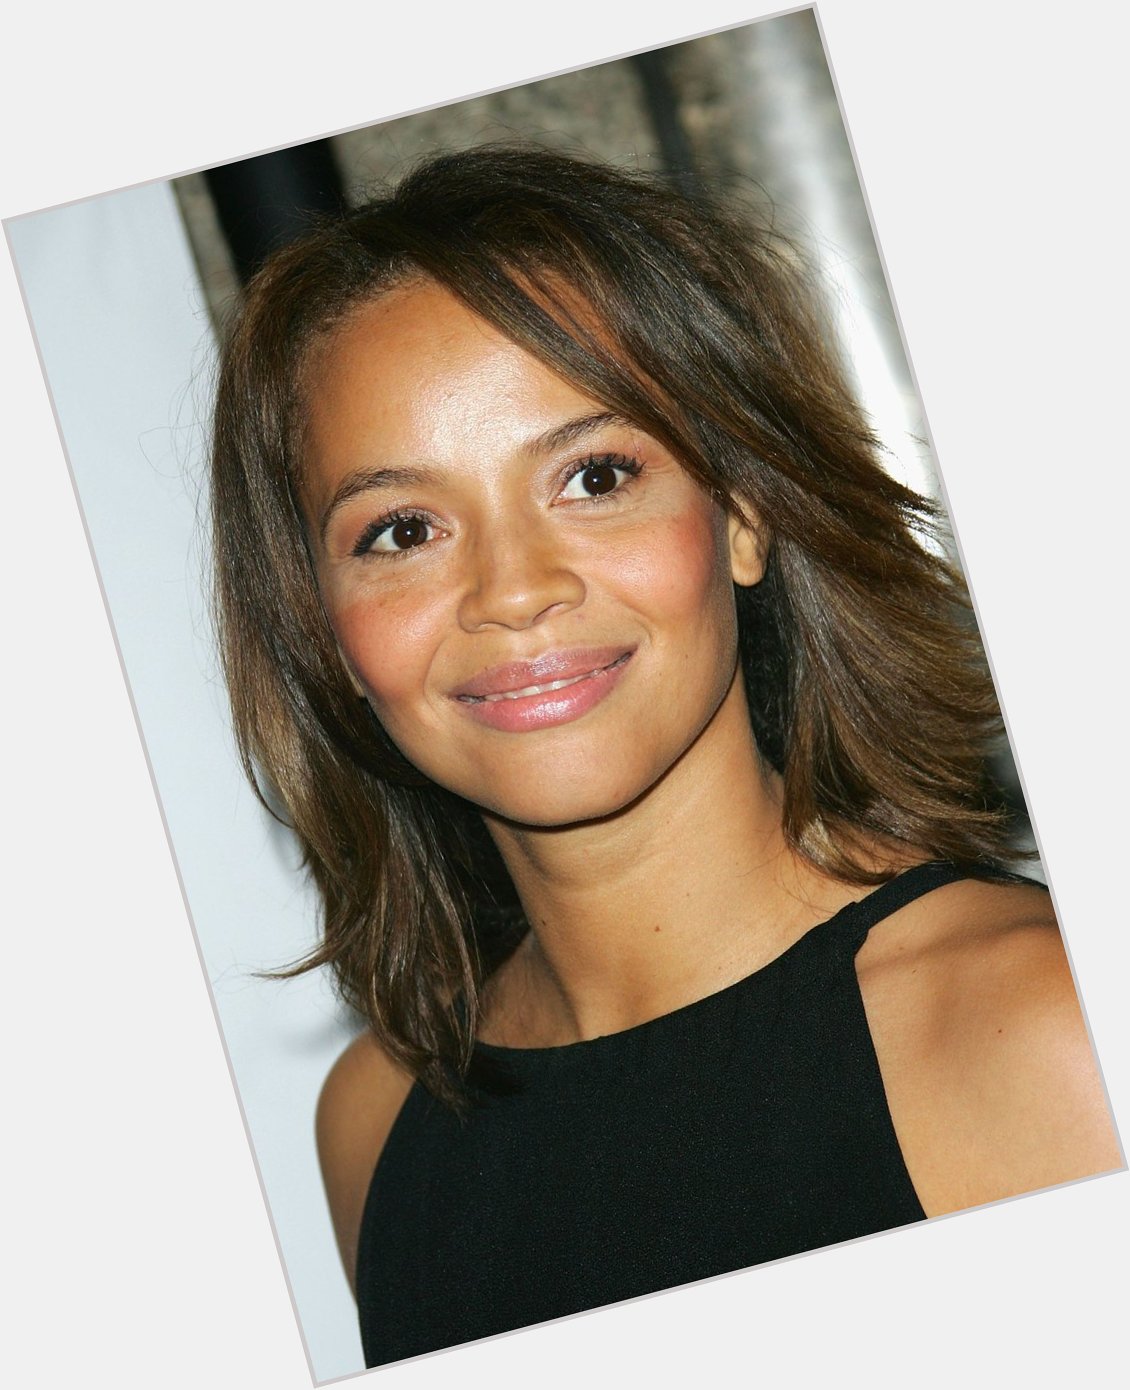  Happy birthday to Carmen Ejogo ( who portrayed Seraphina Picquery in the films! 